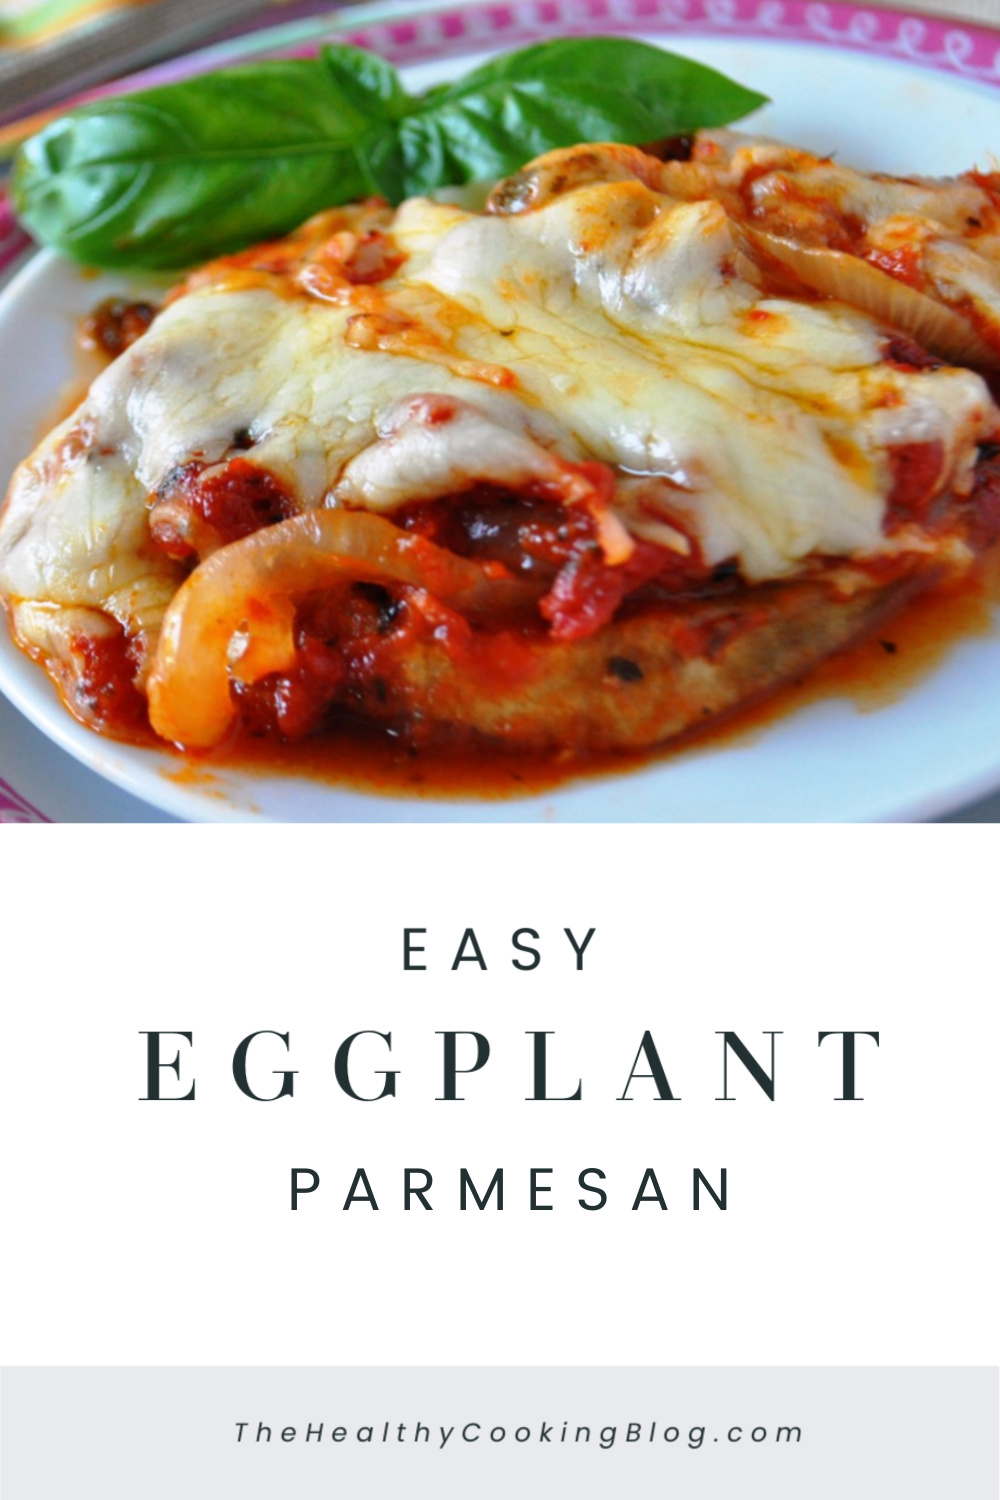 Easy Eggplant Parmesan Recipe Simple To Make in First Easy Cookbook